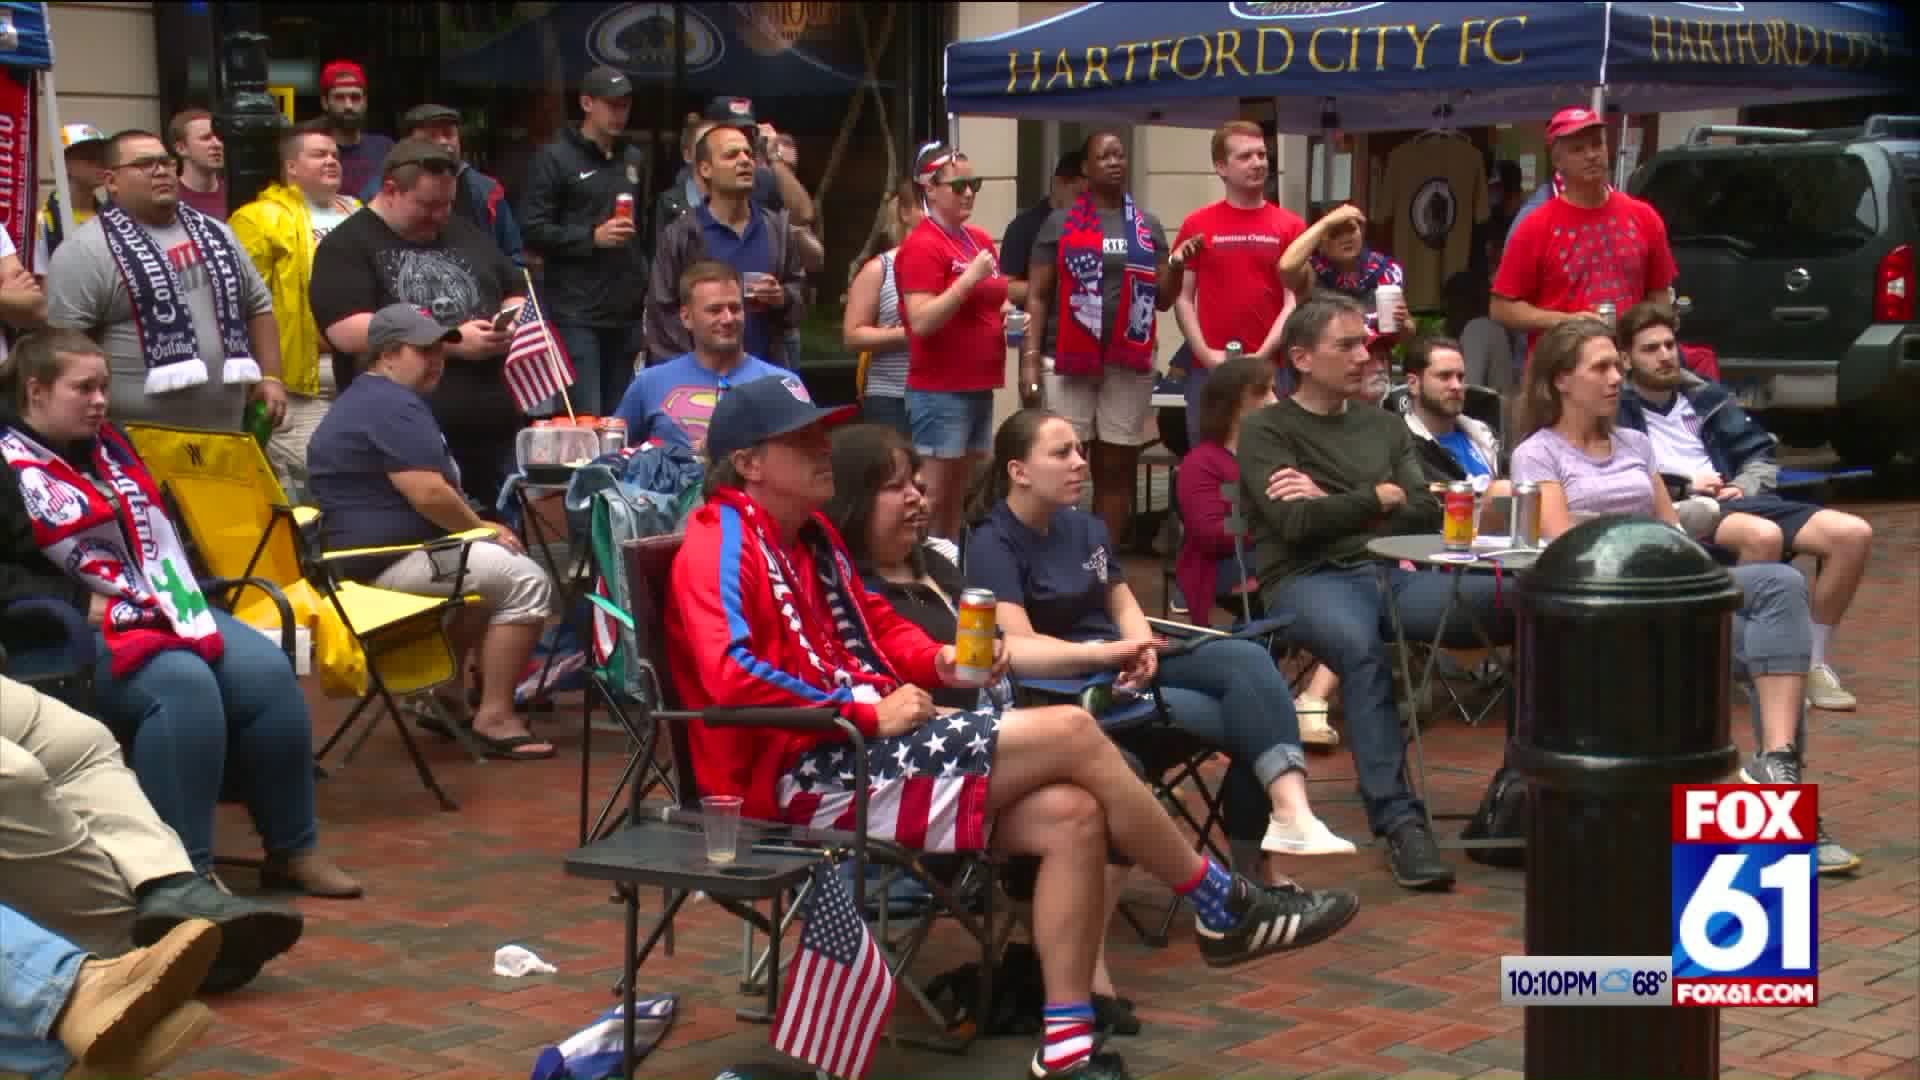 Fans cheering on the Women`s soccer team in Hartford